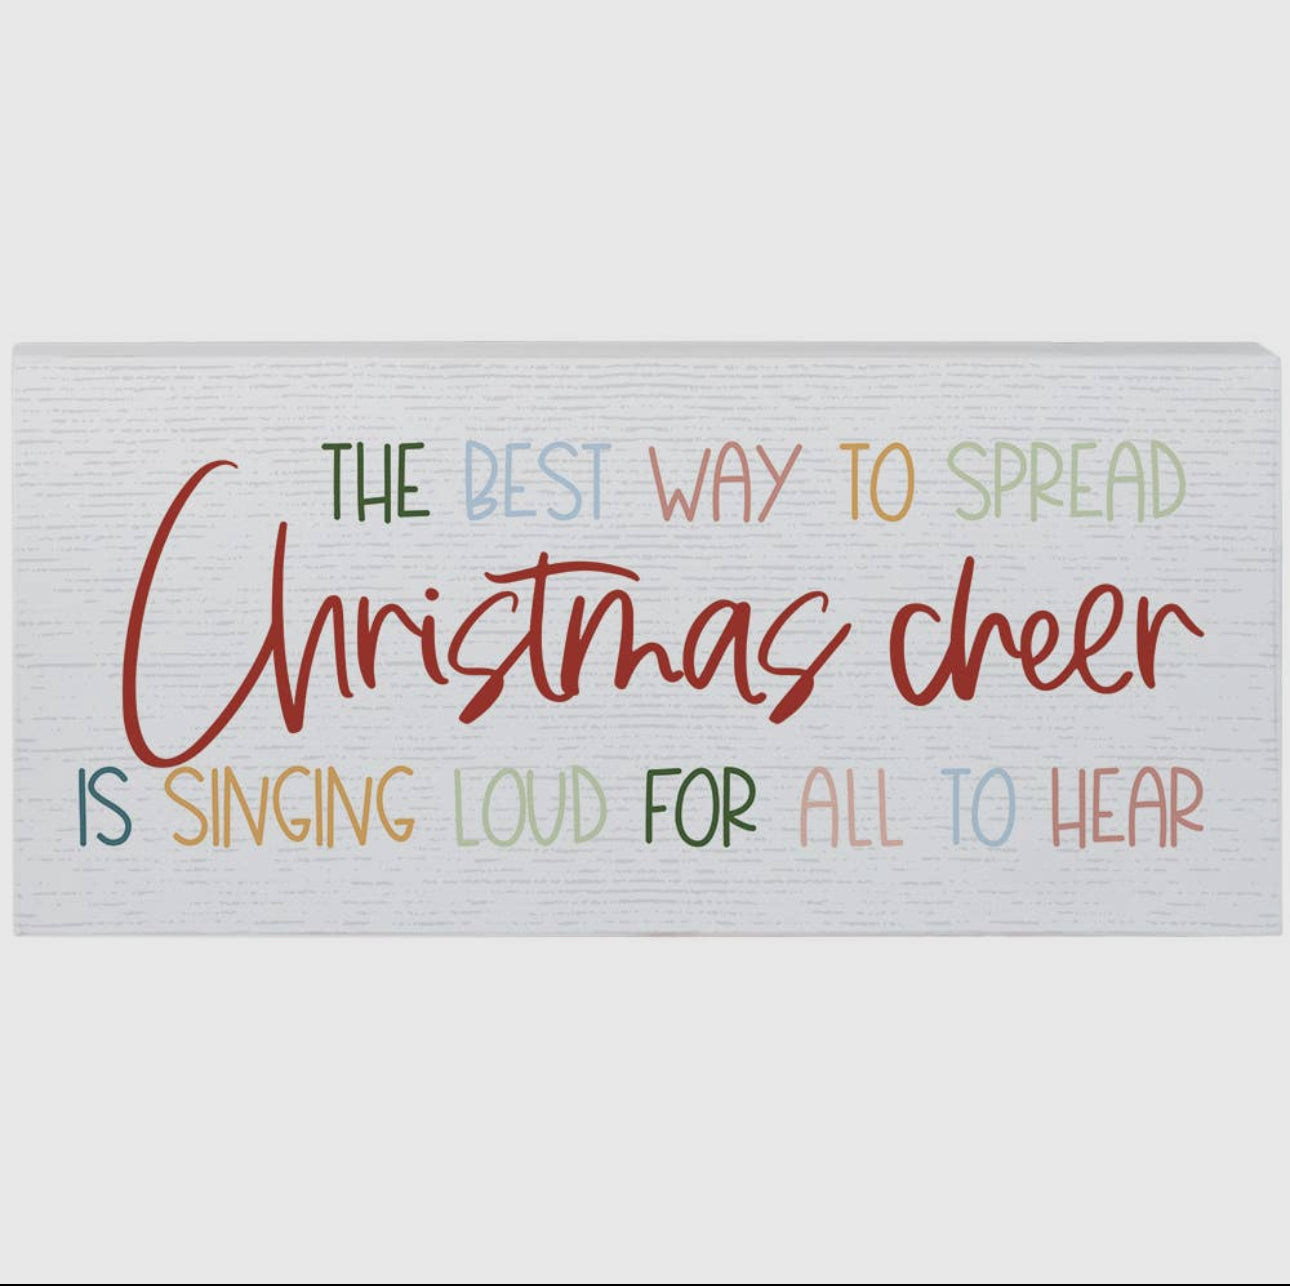 Best Way to Spread Christmas Cheer - large sign